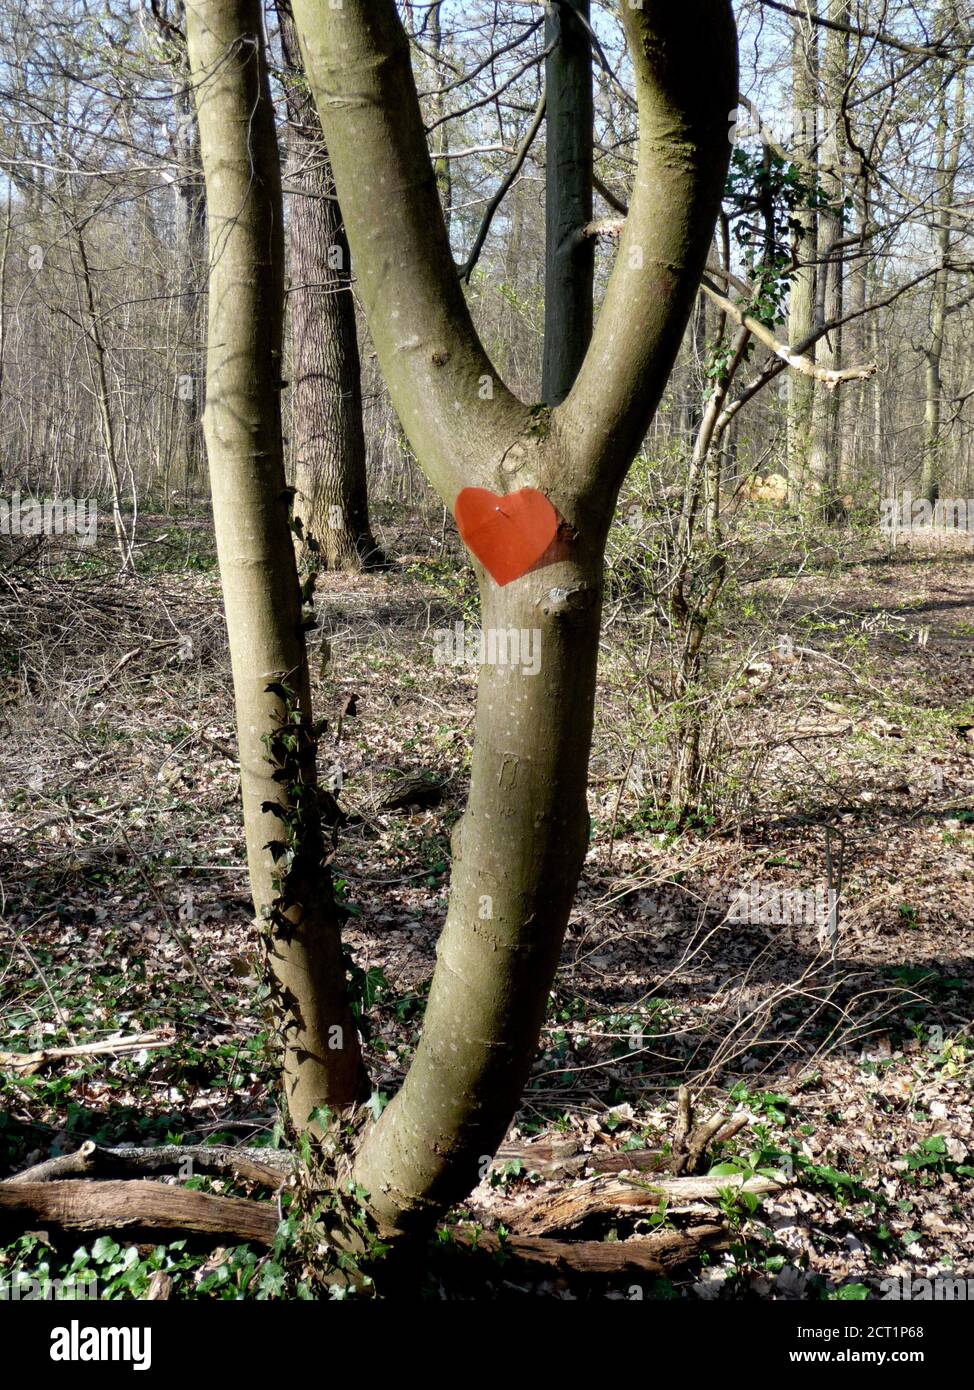 Saint-Germain-en-Laye, France- 03/05/2014: Tree in the forest of Saint-Germain-en-Laye, France with a red paper heart hanging from the trunk. Stock Photo